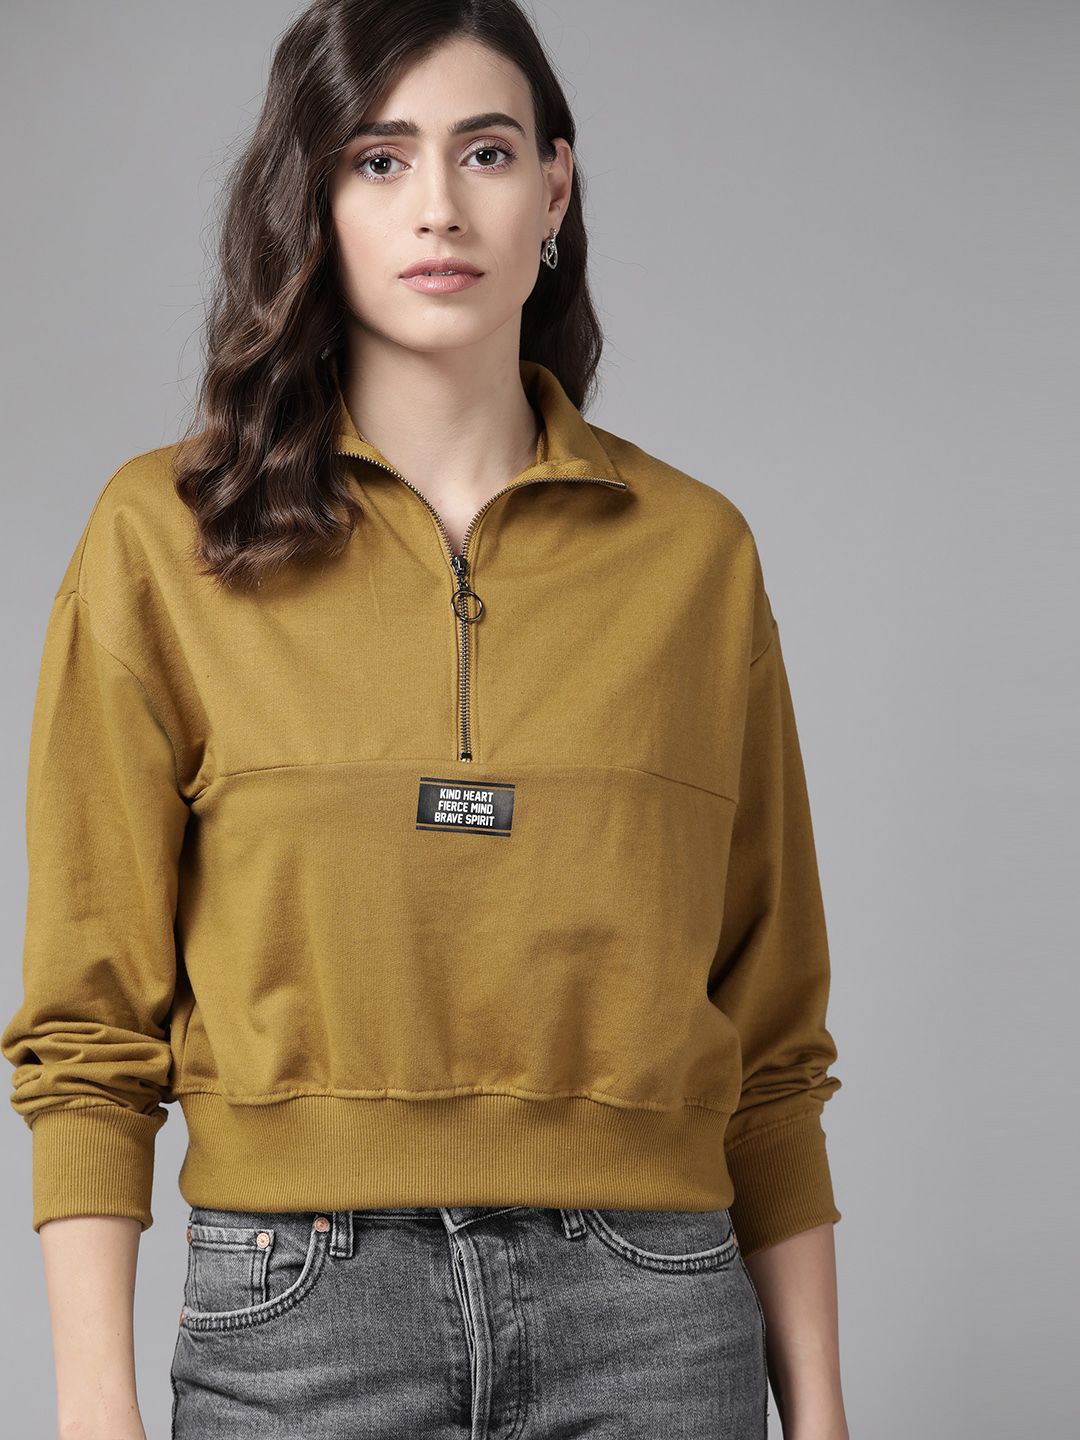 Roadster Women Mustard Yellow Solid Sweatshirt with Typography Print Detail Price in India